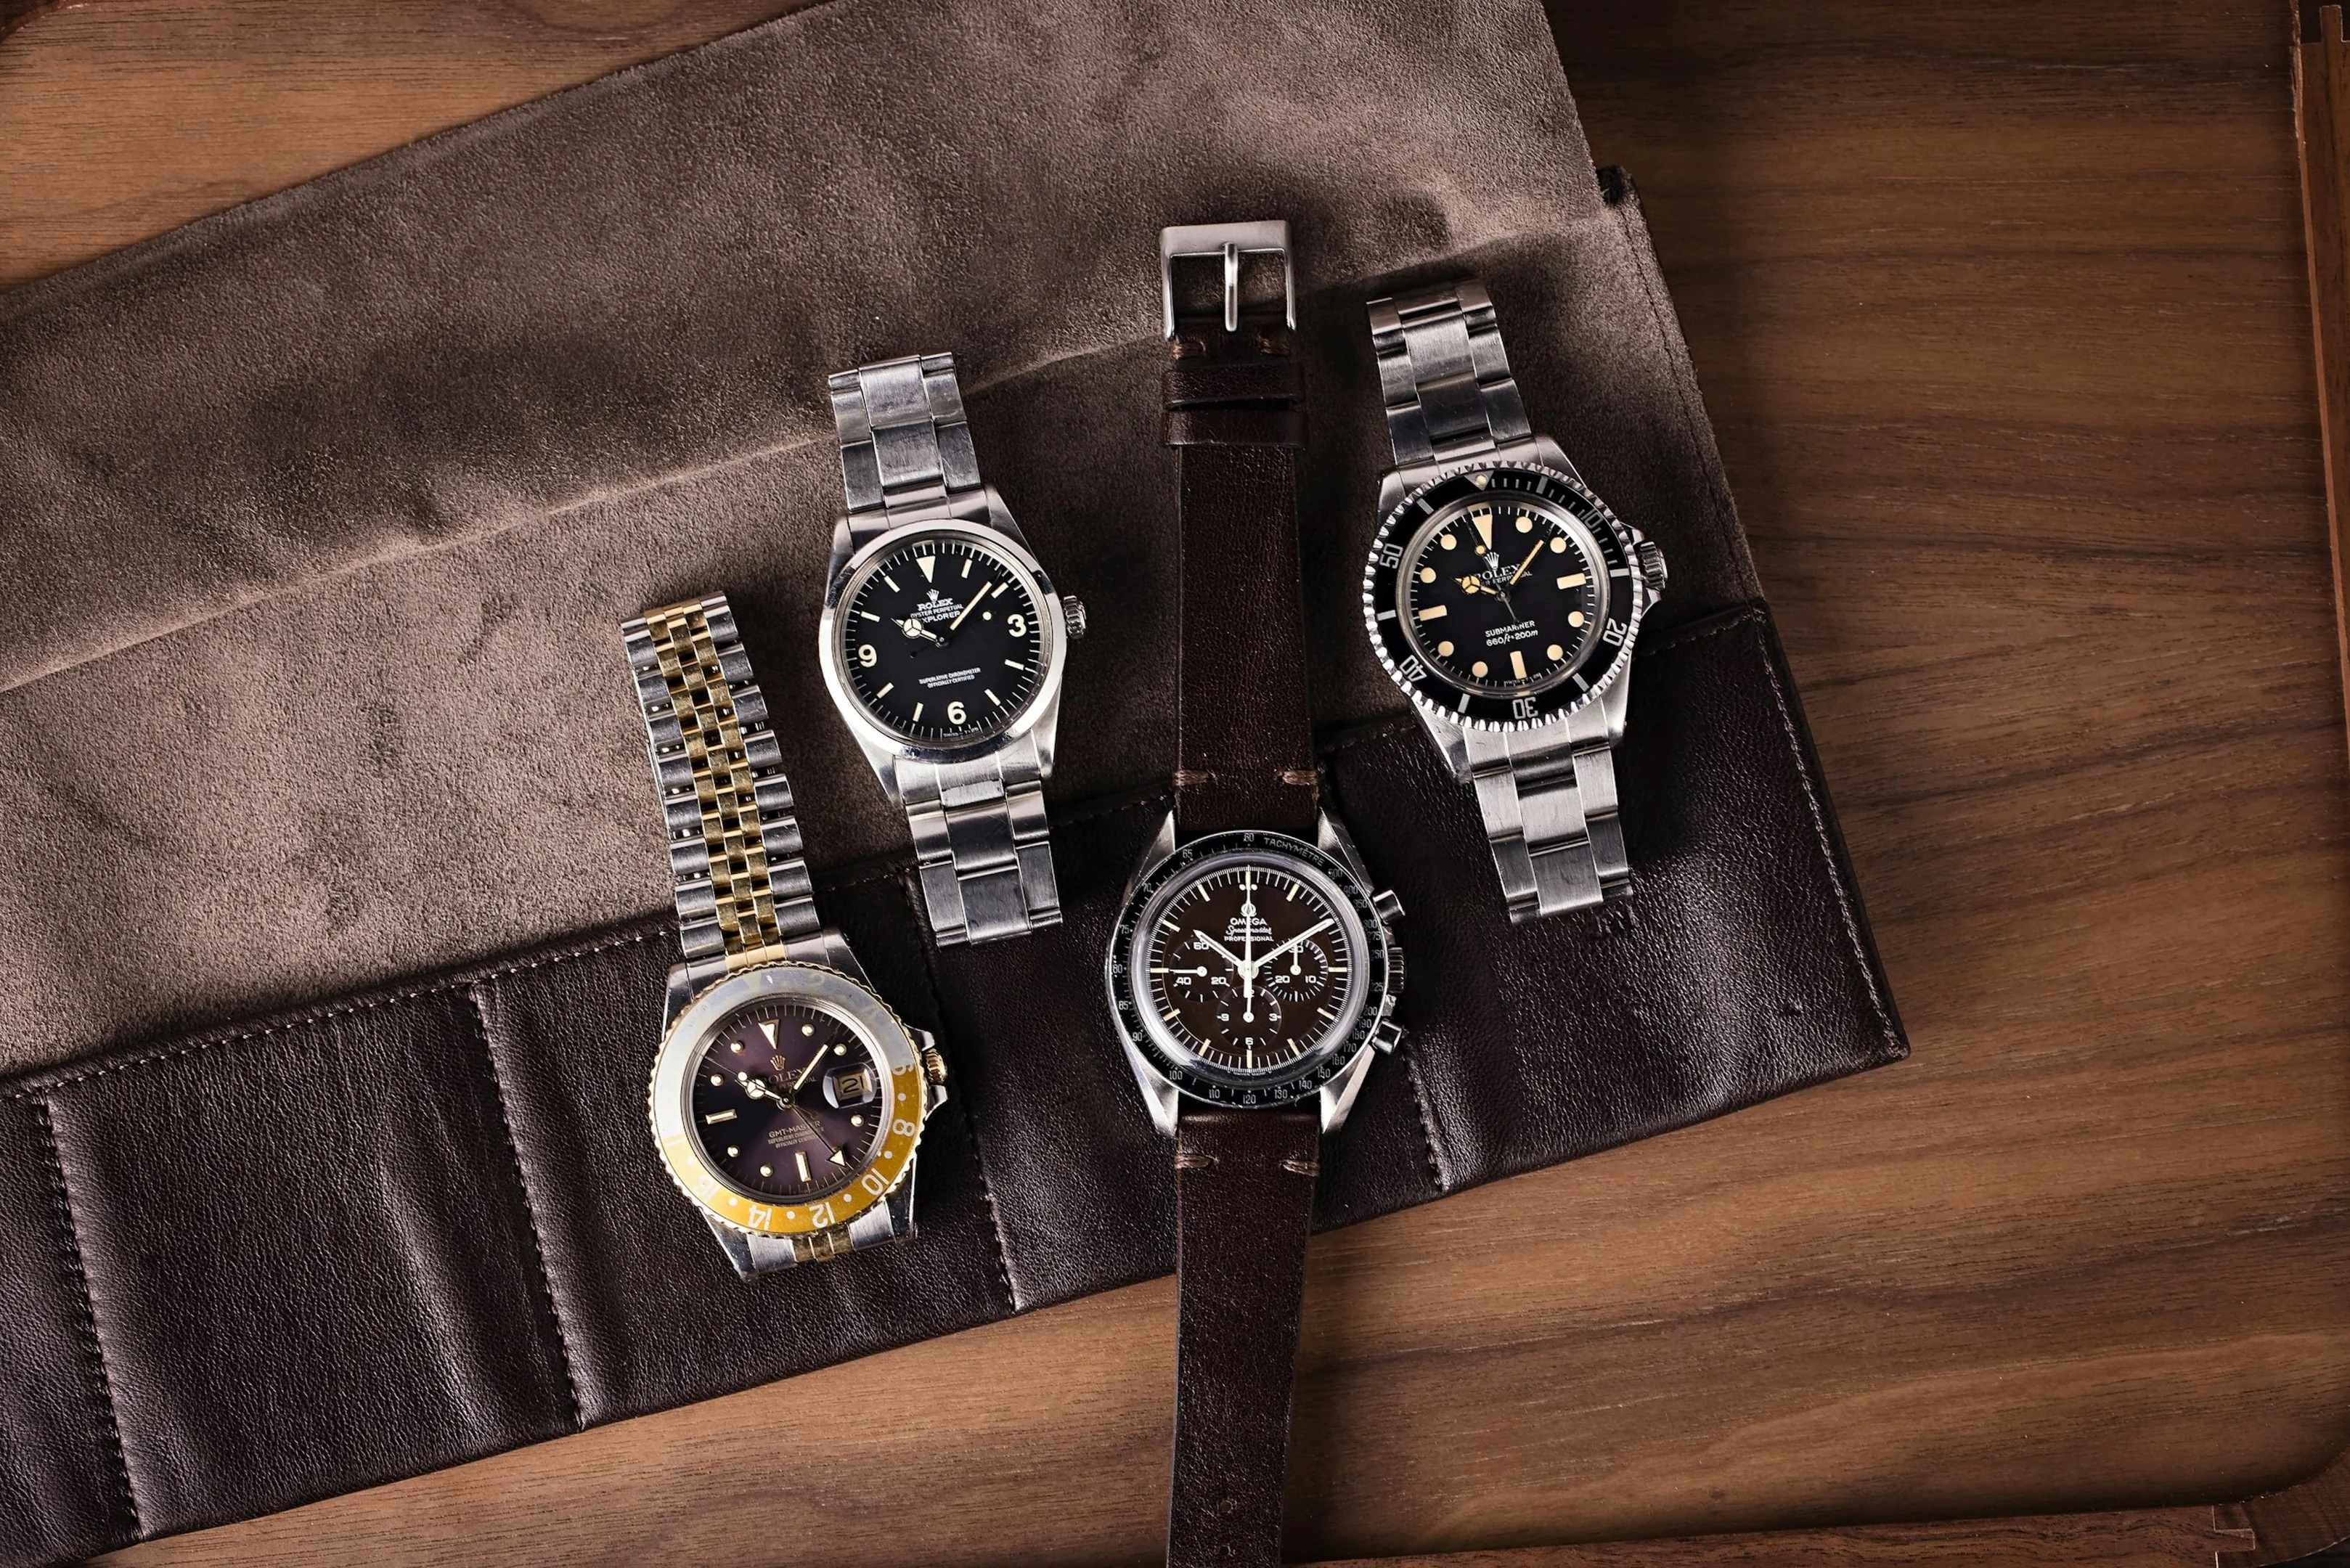 Omega and Rolex watches.